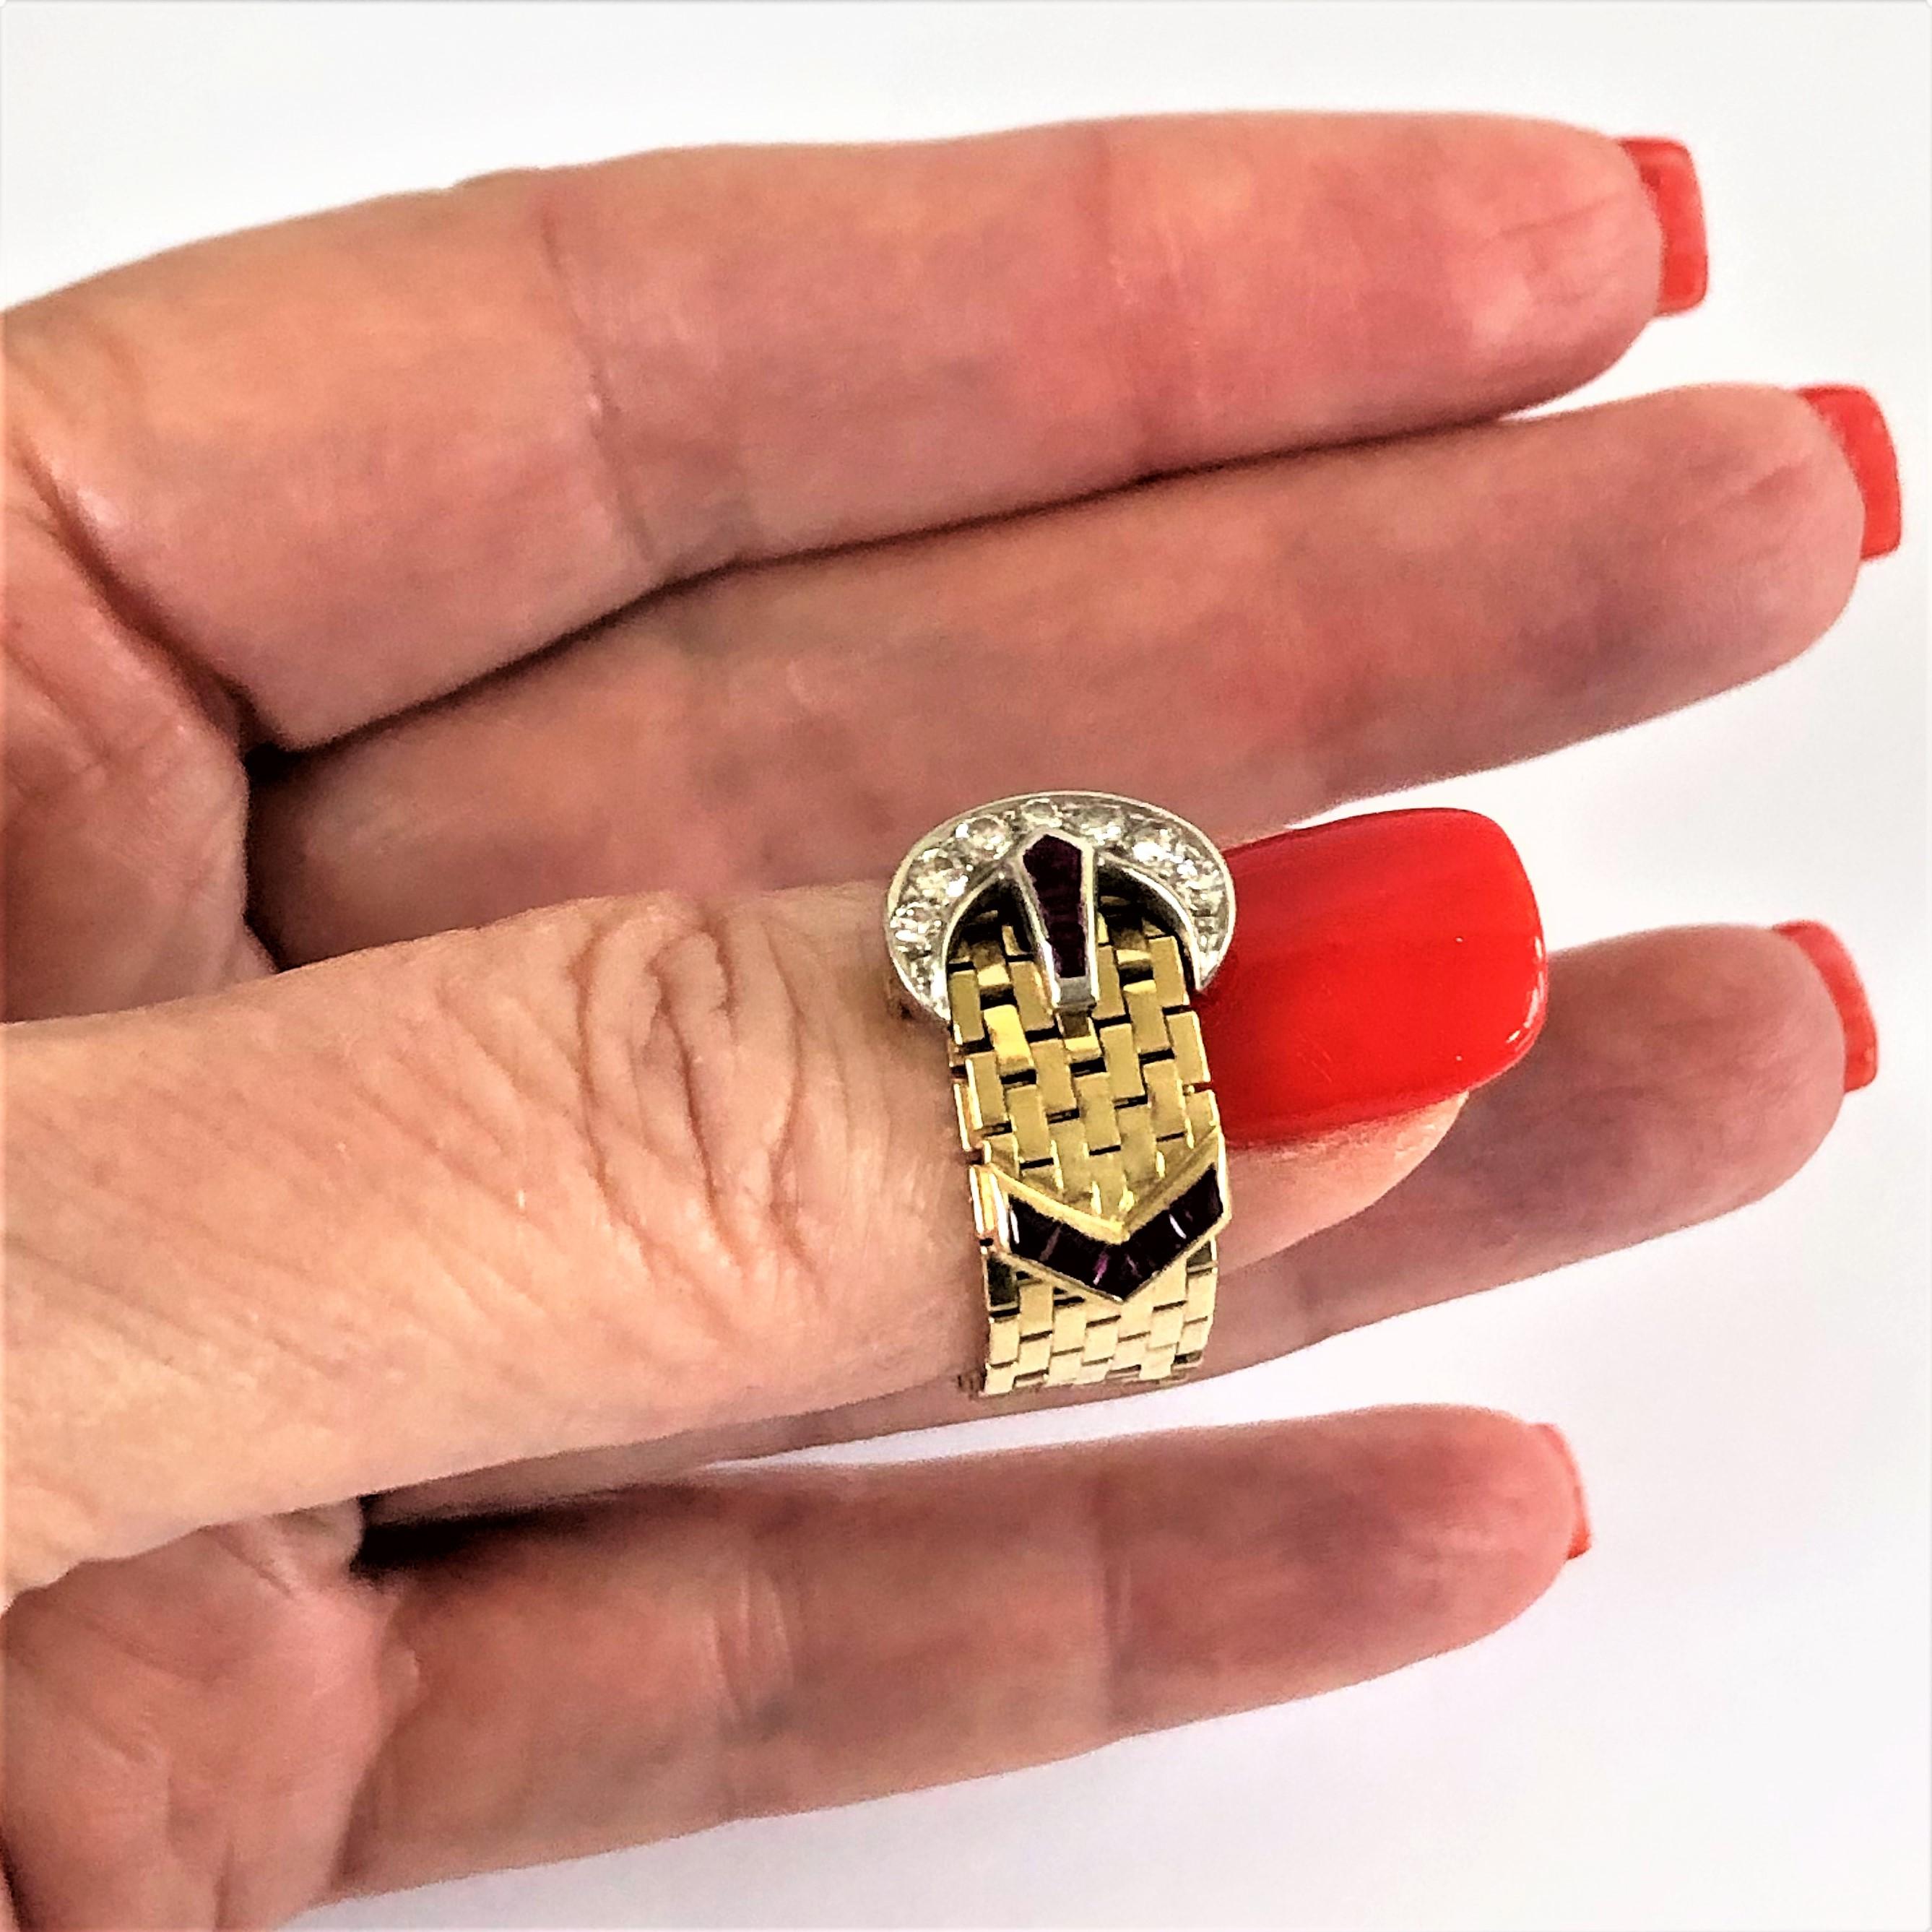 This lovely 14K yellow gold buckle ring was made by Tiffany & Co in the 1940s.
The six diamonds set into the buckle weigh an approximate total of .20CT. The natural 
rubies add a wonderful touch of color to the ring. Measures 3 1/4 inches long by